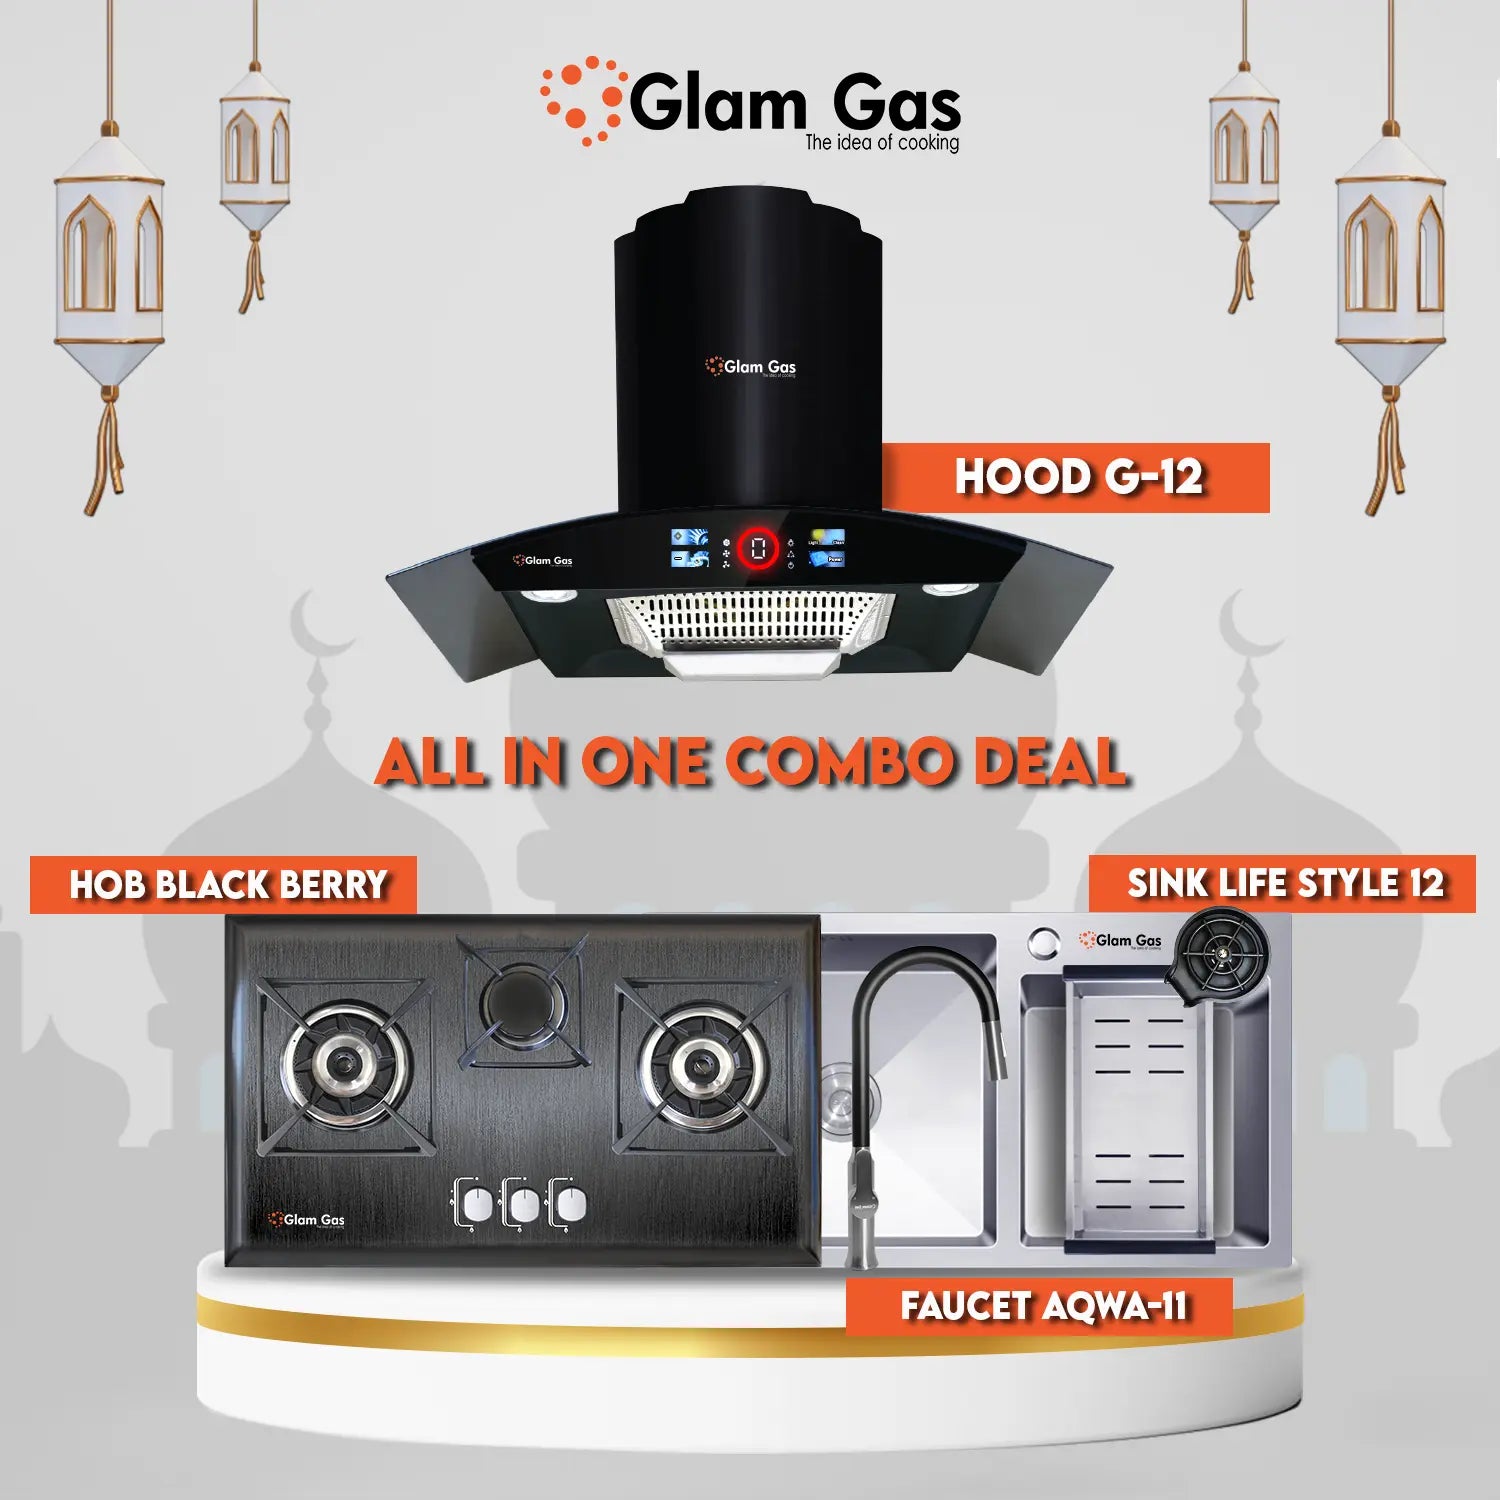 All-in-One Combo Deal:  Range Hood, Built-In Hob, Faucet, Sink